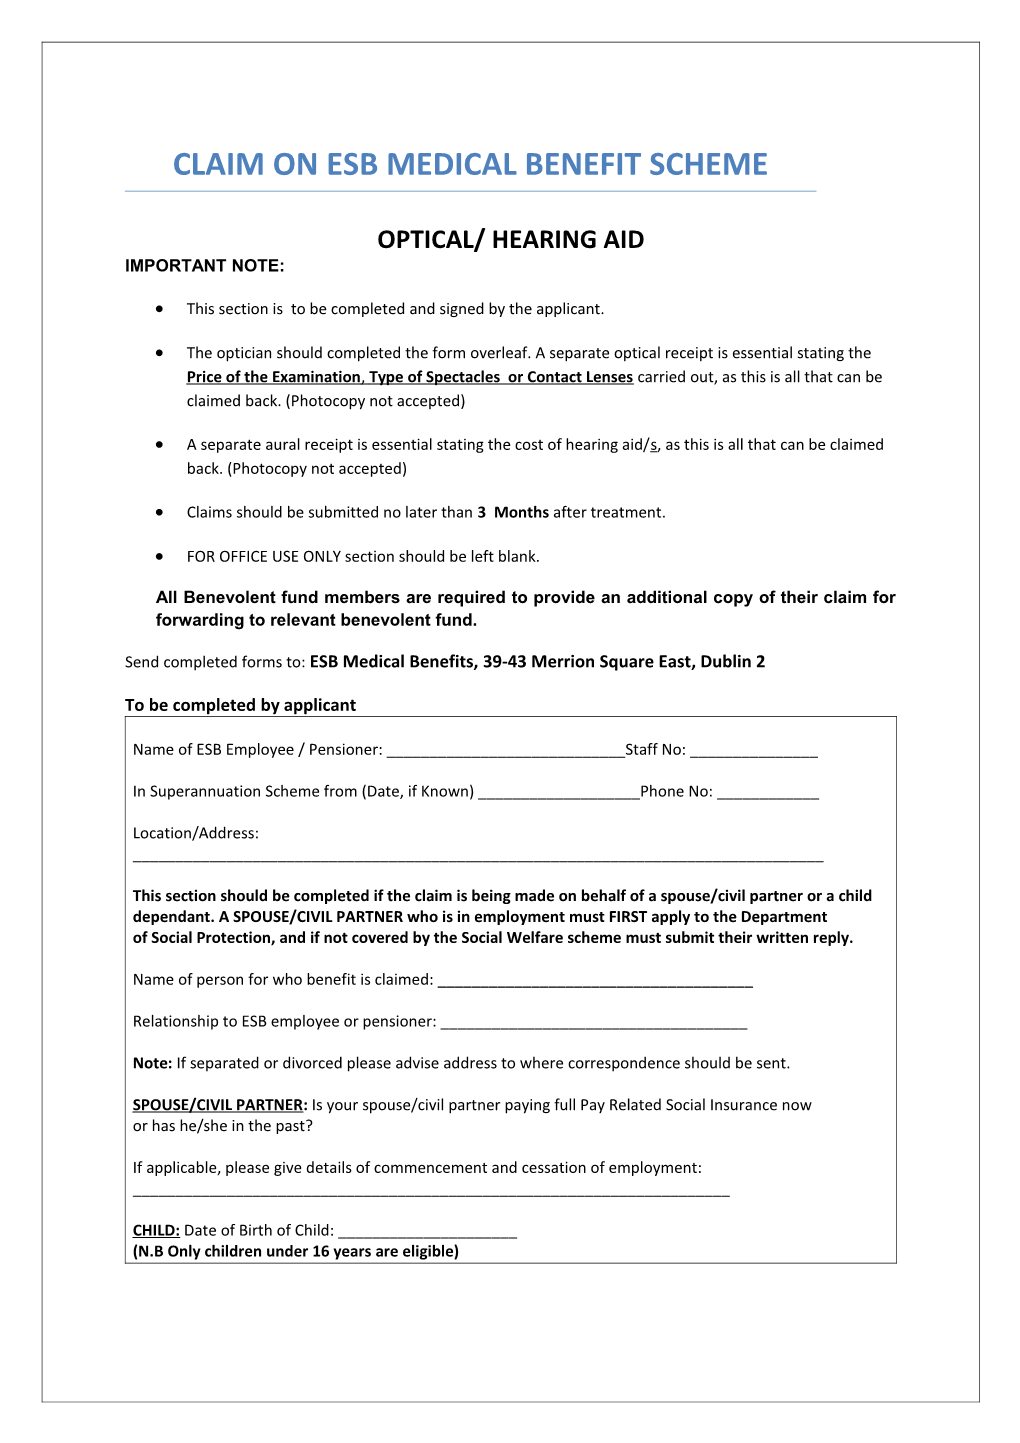 Optical and Hearing Benefit Form